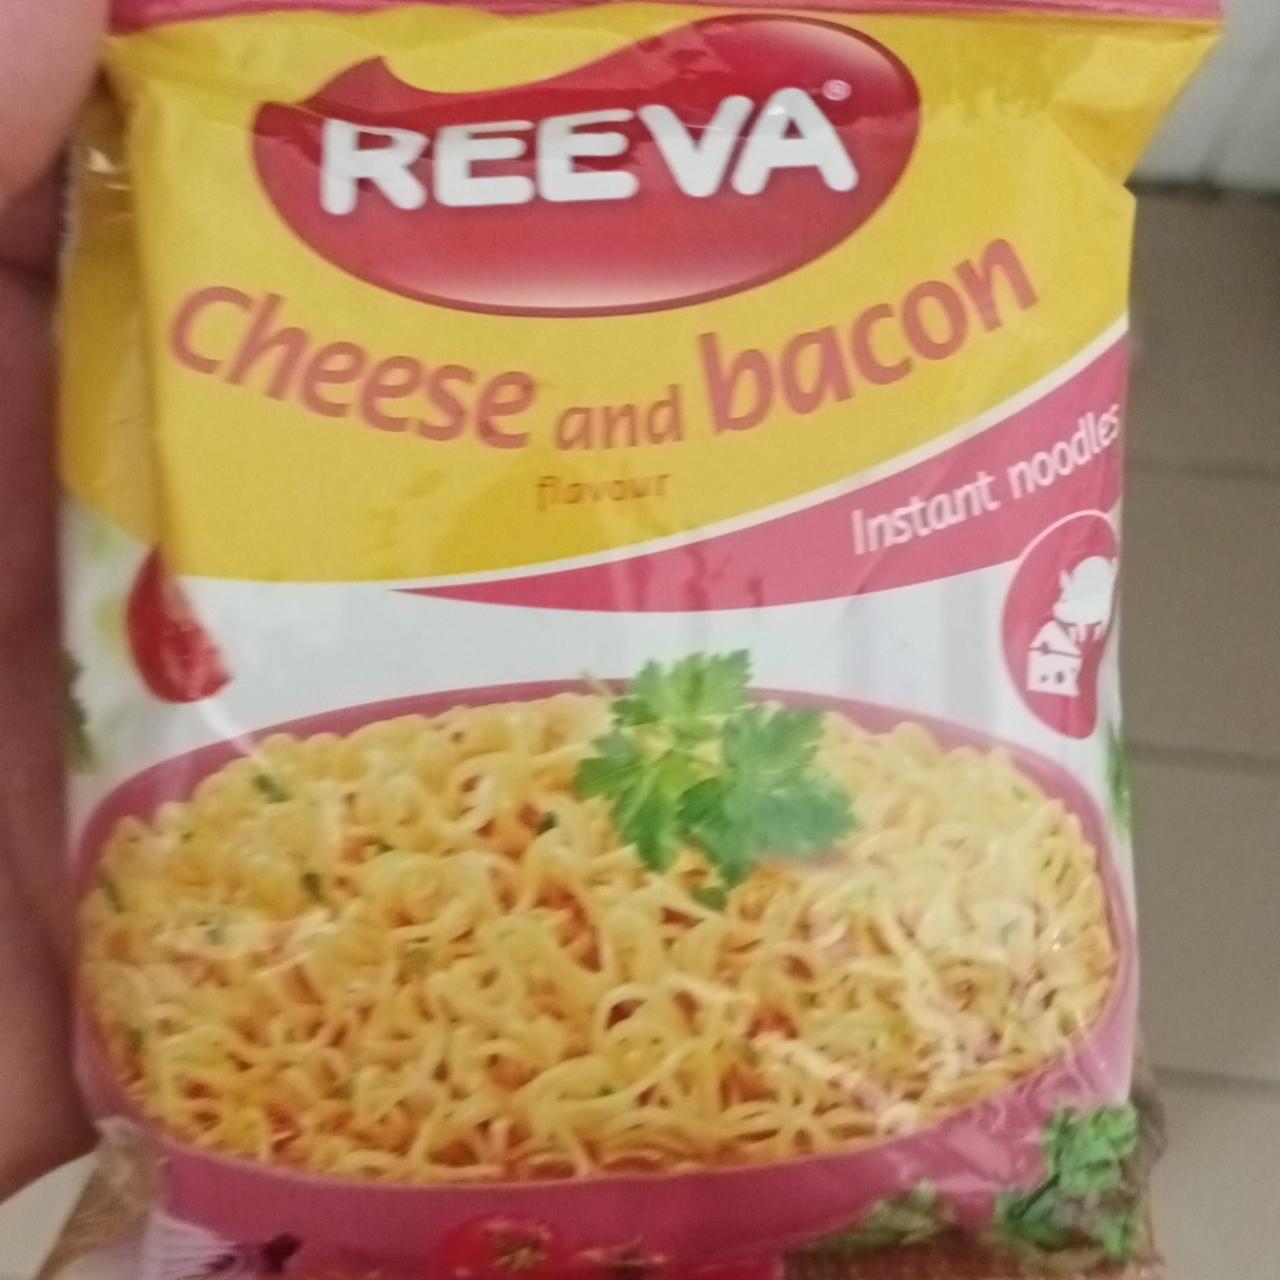 Фото - Instant Noodles with Cheese and Bacon Reeva